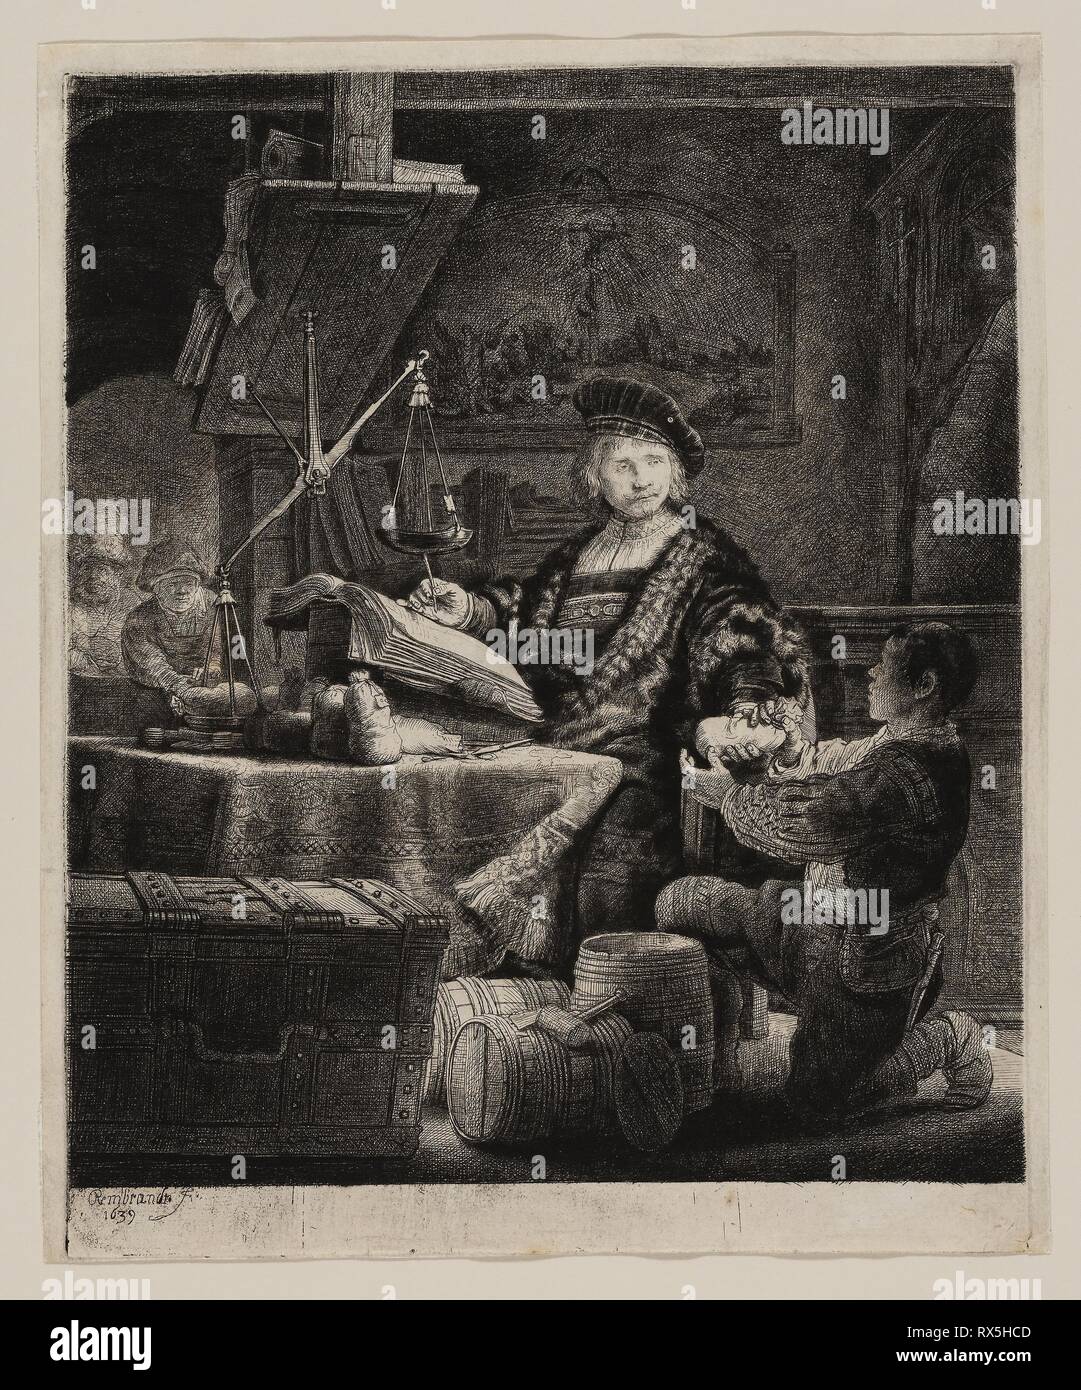 Jan Uytenbogaert, 'The Goldweigher'. Rembrandt van Rijn; Dutch, 1606-1669. Date: 1639. Dimensions: 237 x 203 mm (image); 249 x 204 mm (plate); 260 x 215 mm (sheet). Etching and drypoint on paper. Origin: Holland. Museum: The Chicago Art Institute. Author: REMBRANDT HARMENSZOON VAN RIJN. HARMENSZOON VAN RIJN REMBRANDT. Rembrandt van Rhijn. Stock Photo